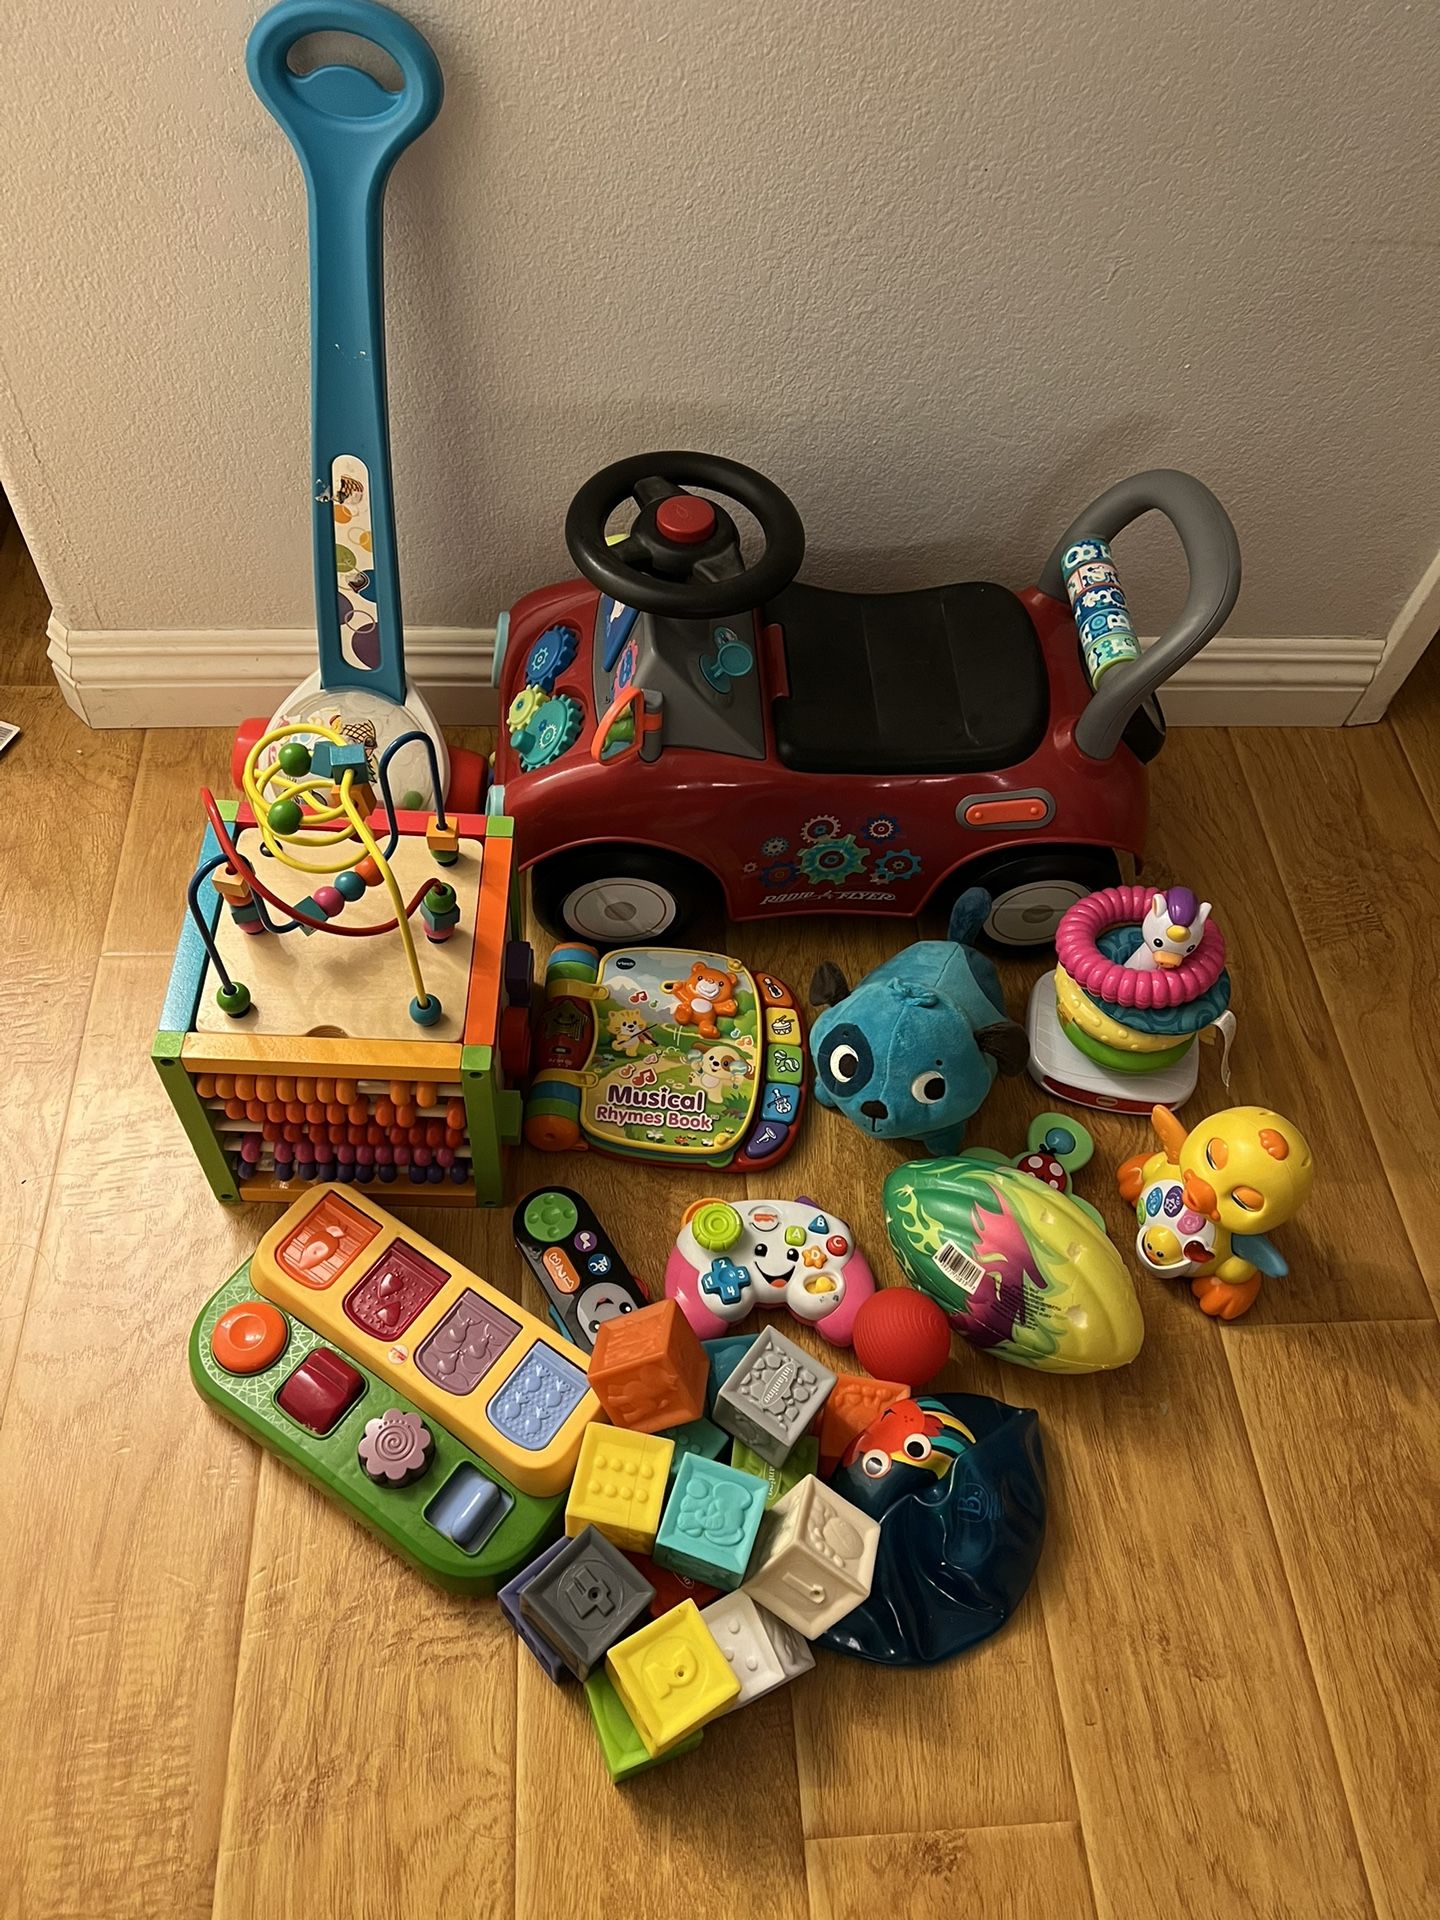 Baby Toddler Toy Bundle - Radio Flyer Push Car, Popper, Cube, Musical Book